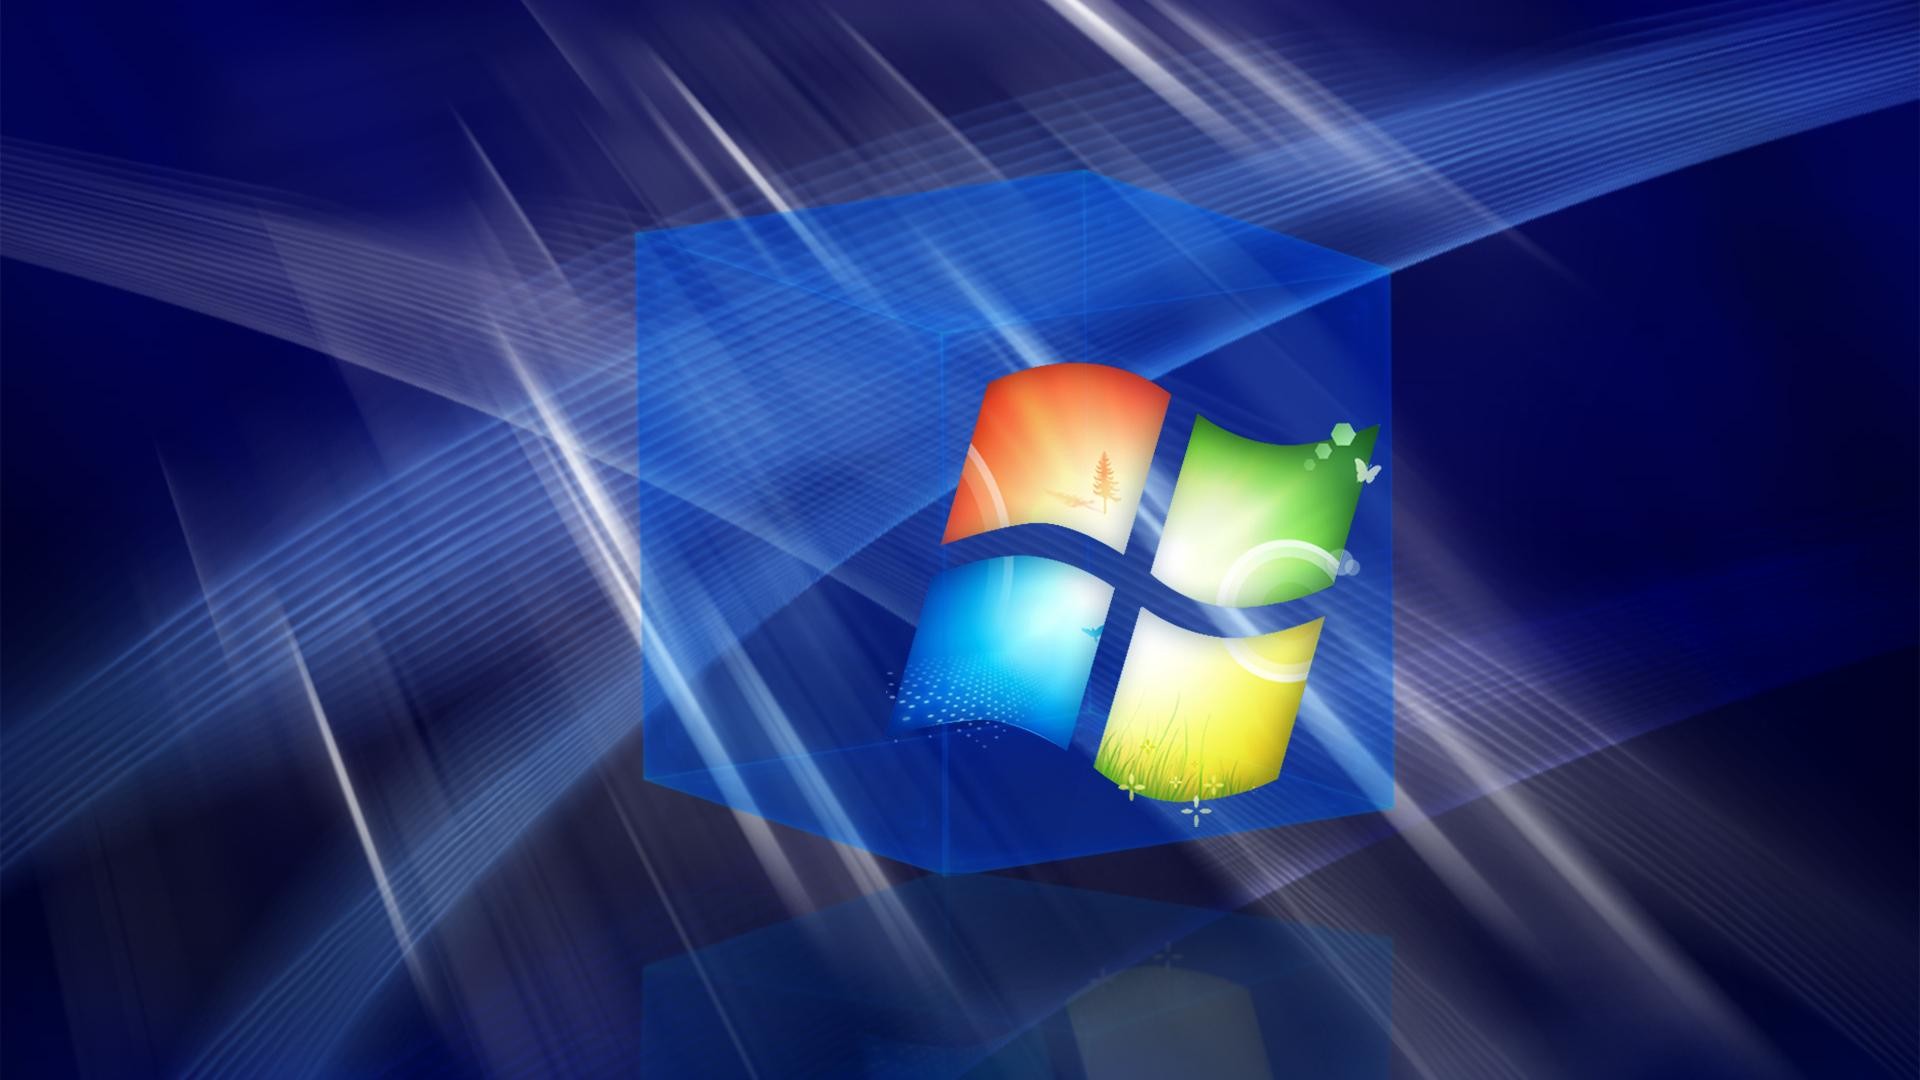 Windows 7 Ultimate Wallpaper HD (76+ pictures)